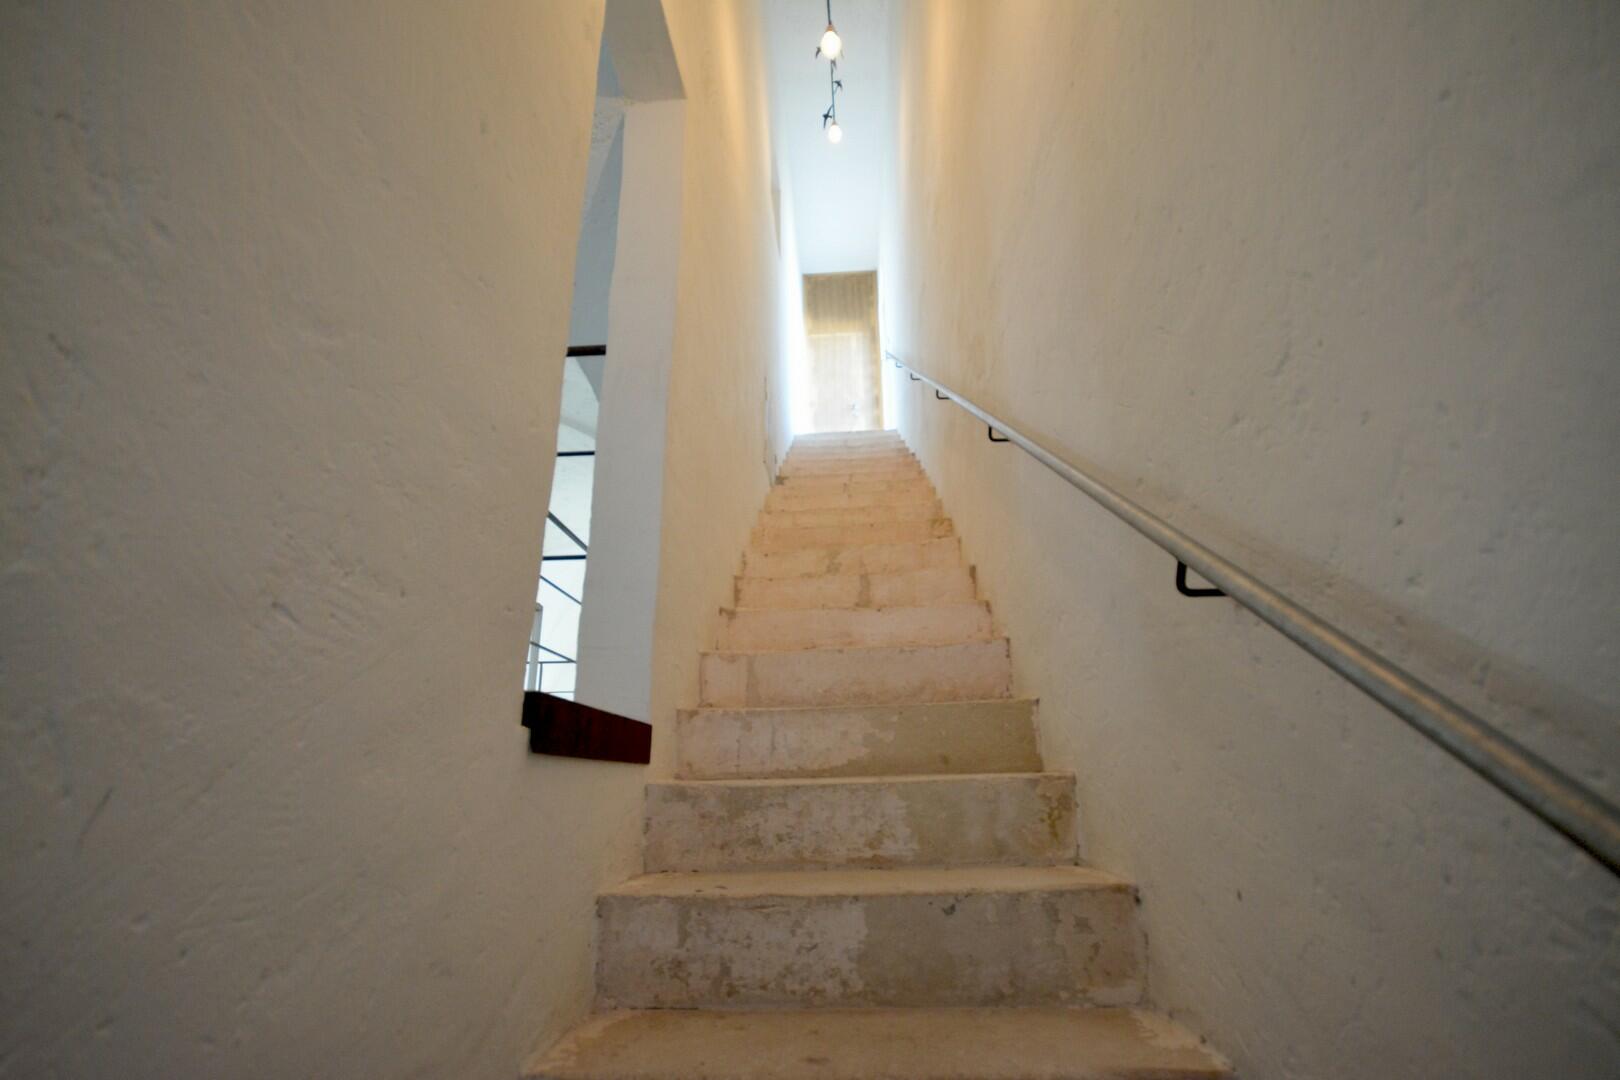 internal staircase to the first floor